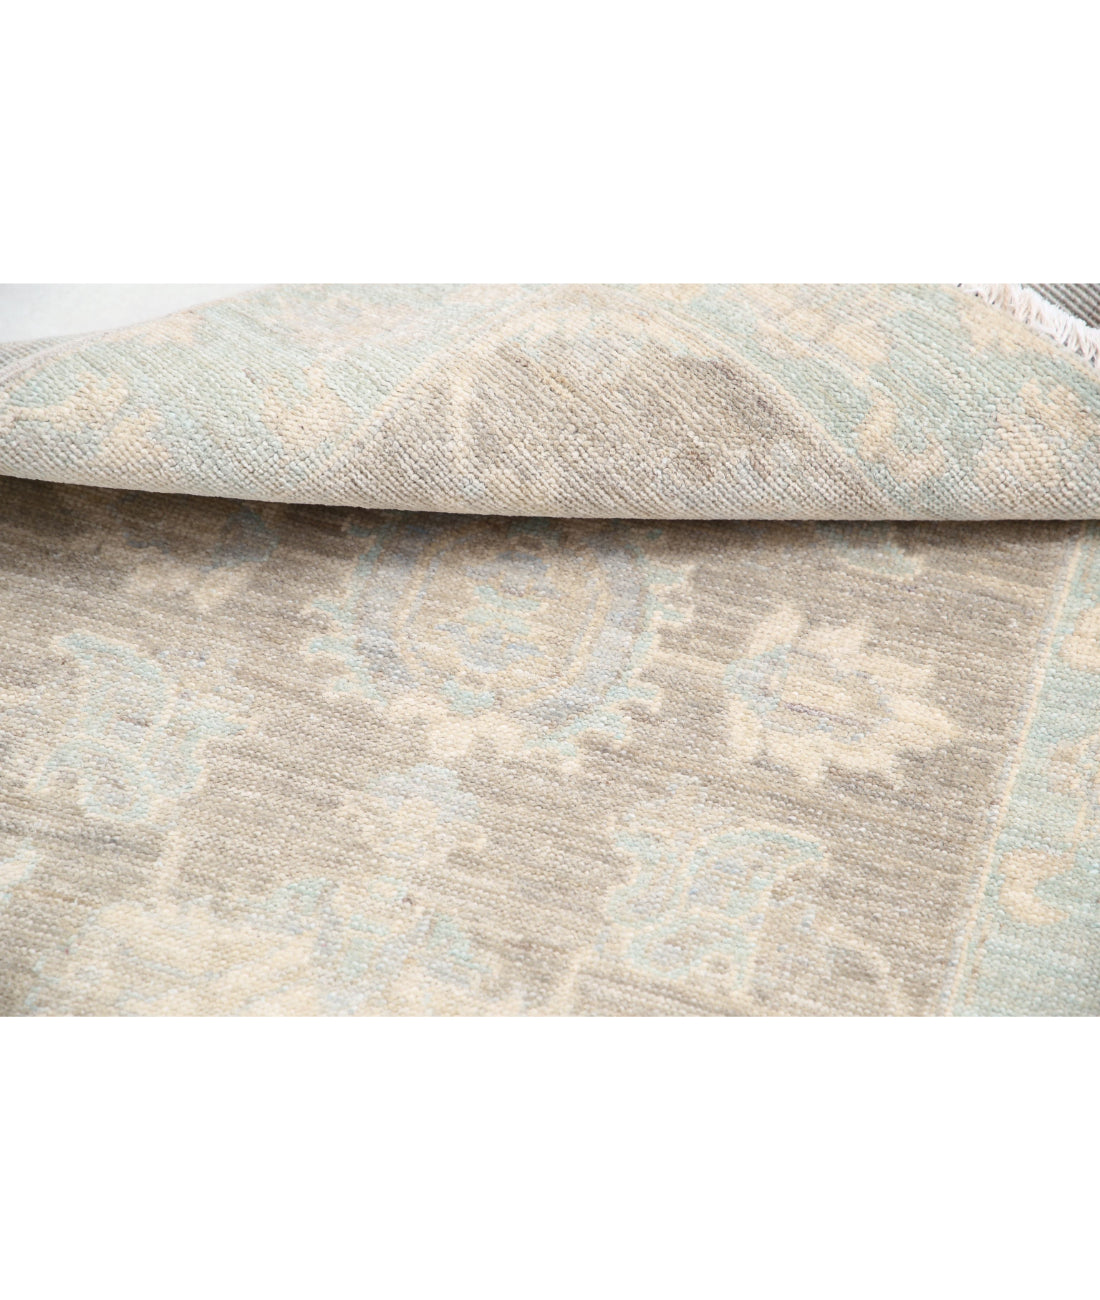 Hand Knotted Serenity Wool Rug - 2'0'' x 3'0'' 2'0'' x 3'0'' (60 X 90) / Brown / Blue